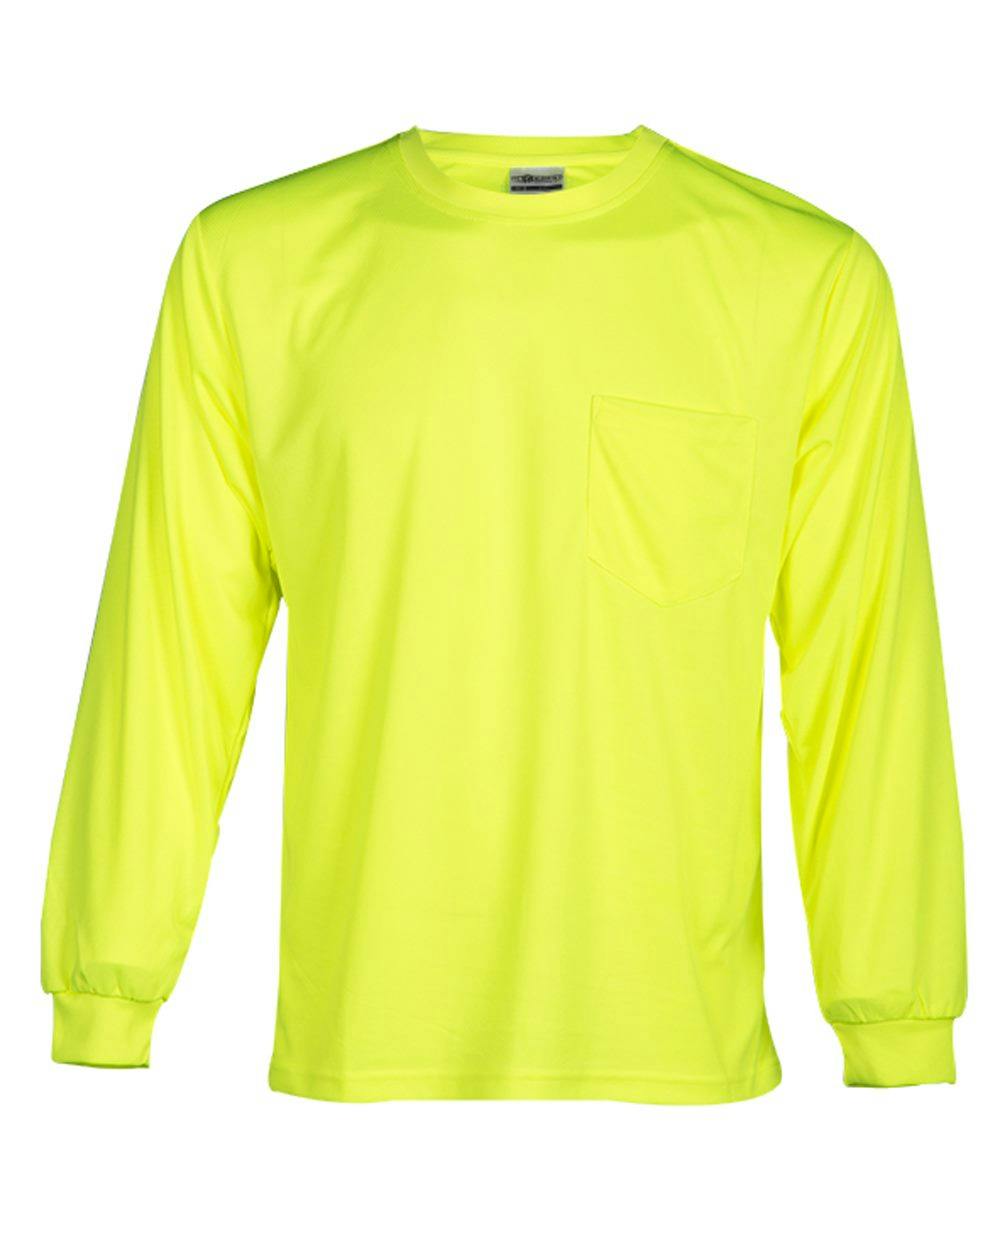 Image for Microfiber Polyester Long Sleeve T-Shirt - 9122-9123